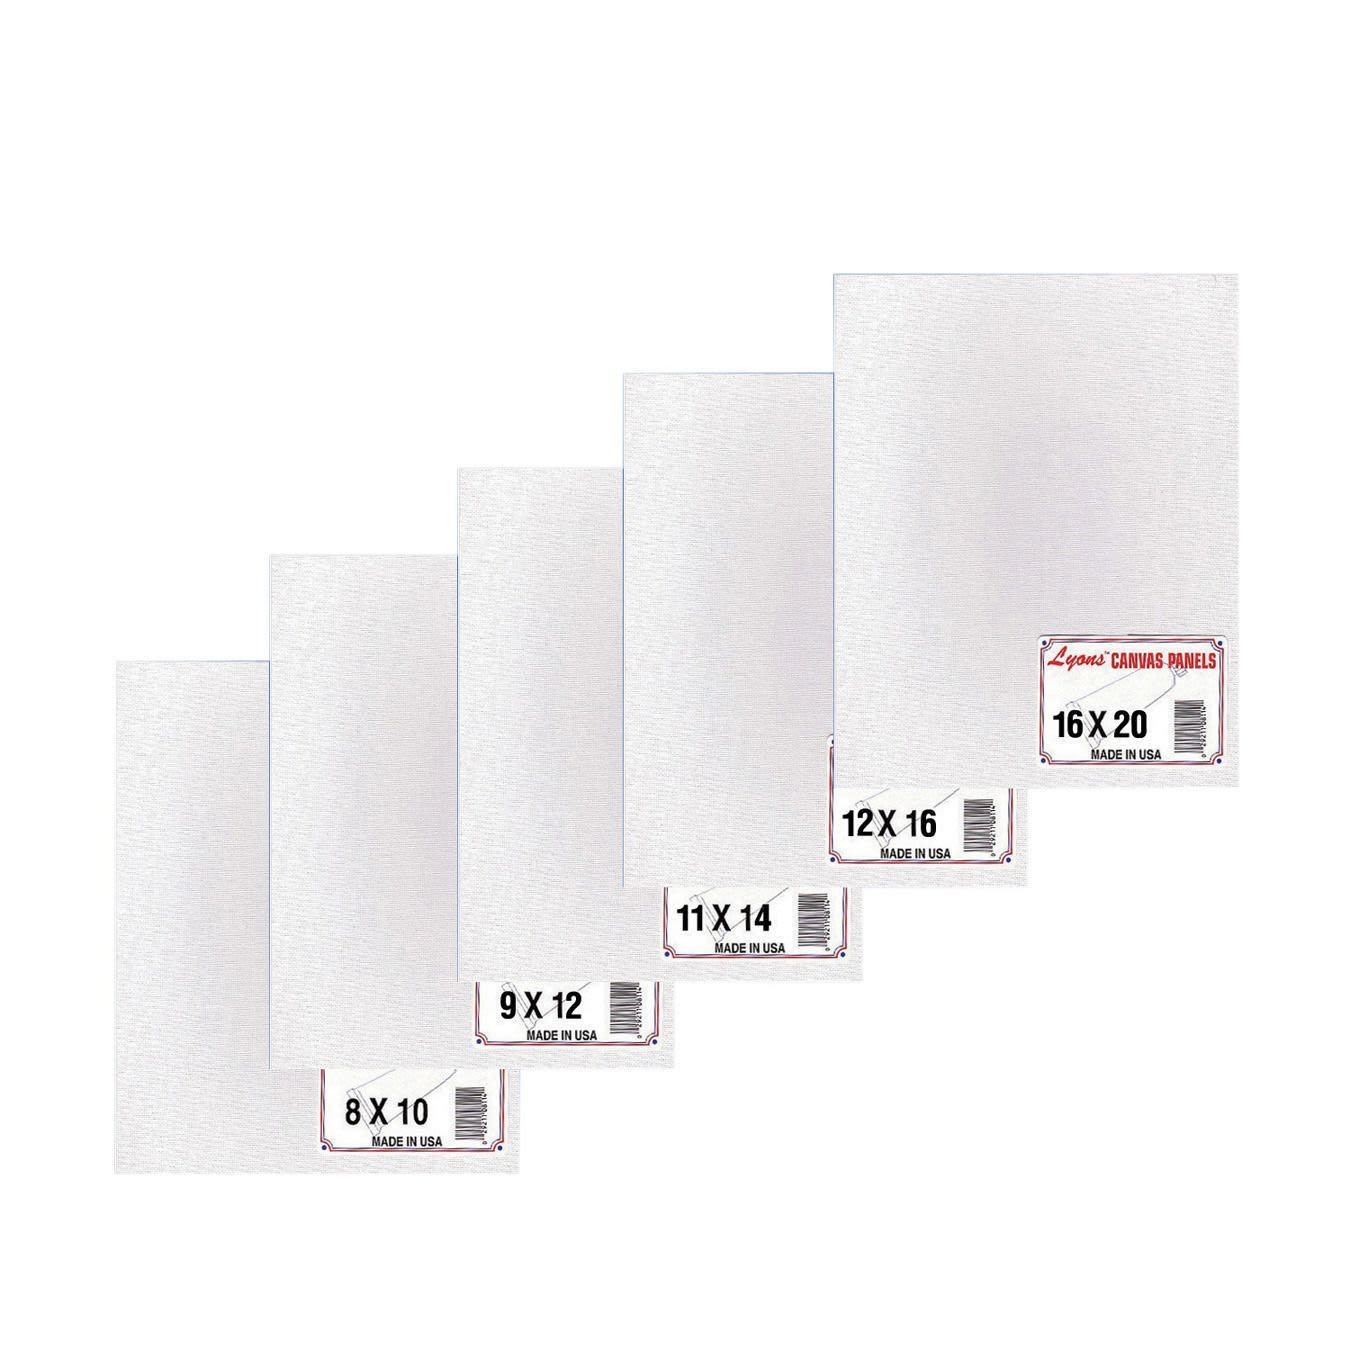 Buy Canvas Panels (Pack of 6) at S&S Worldwide